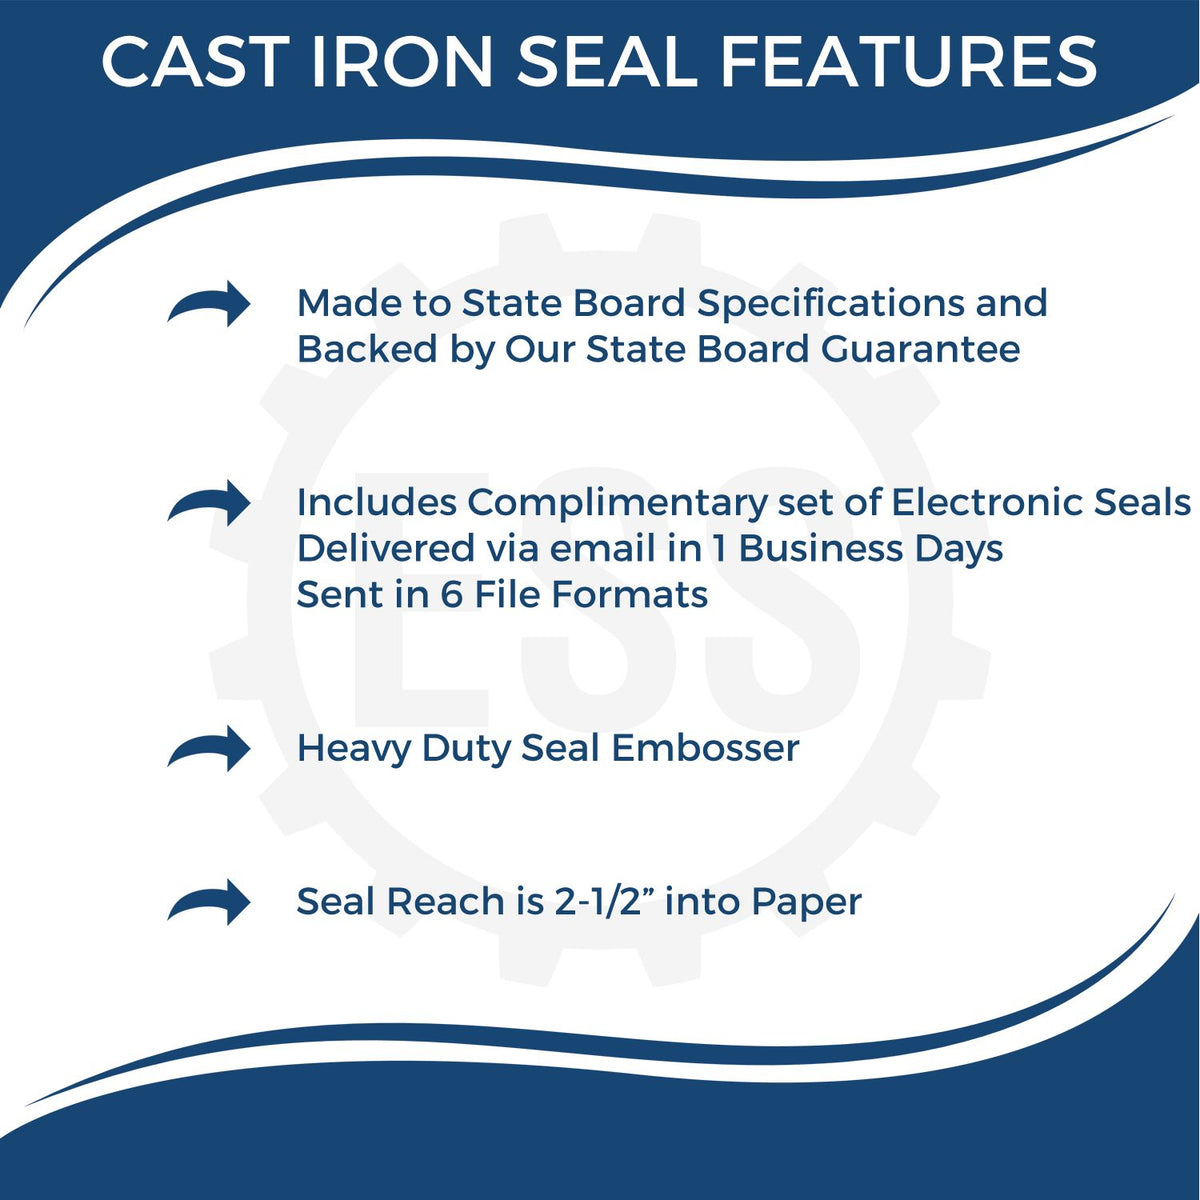 A picture of an infographic highlighting the selling points for the Heavy Duty Cast Iron New Jersey Architect Embosser